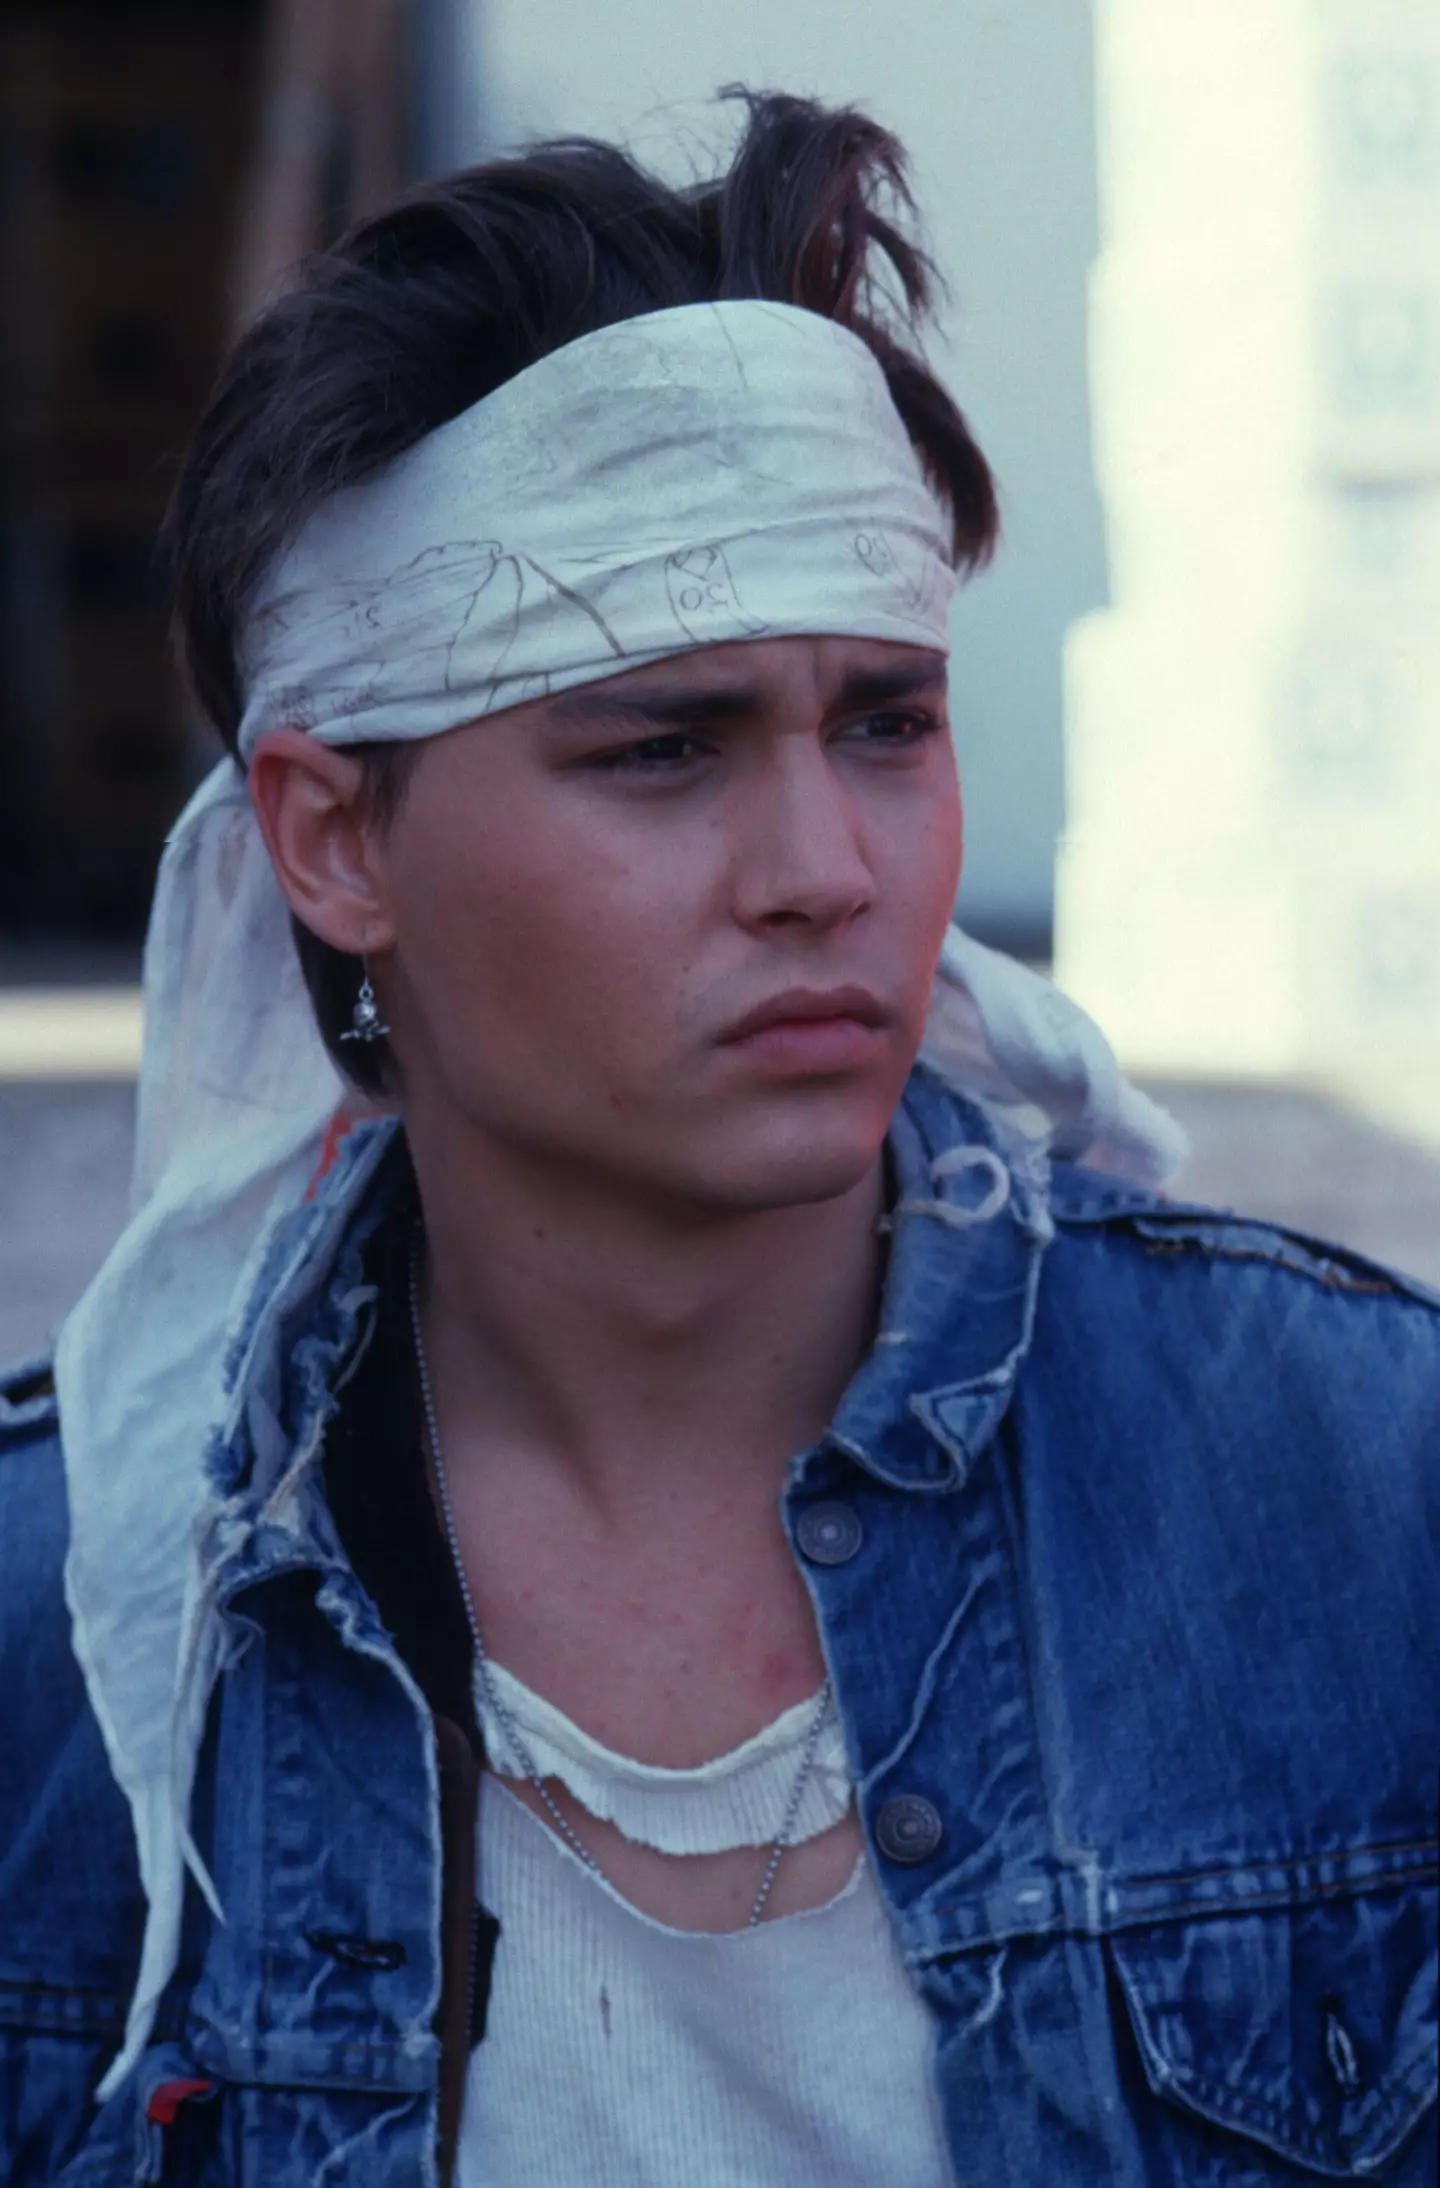 A young Johnny Depp on the set of 21 Jump Street.